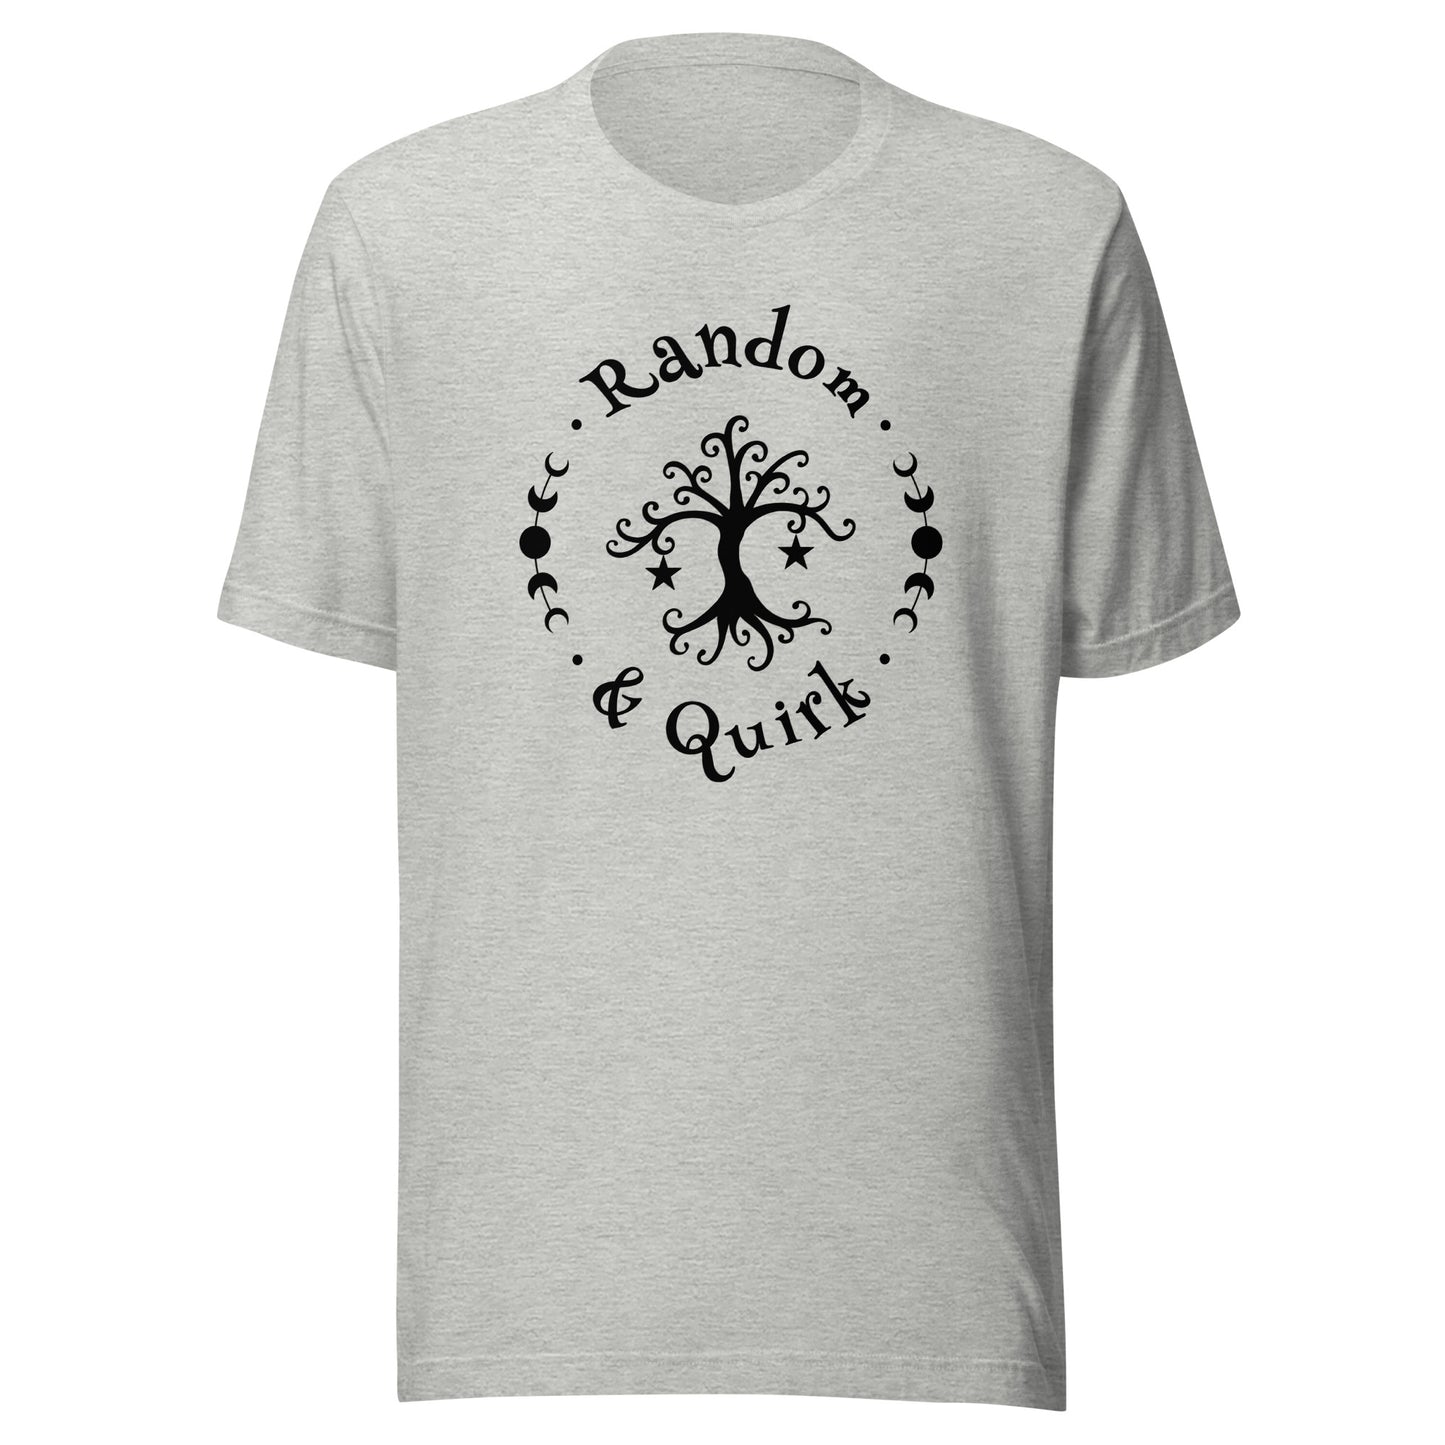 Commissions - random and quirk logo T shirt, black logo, athletic heather